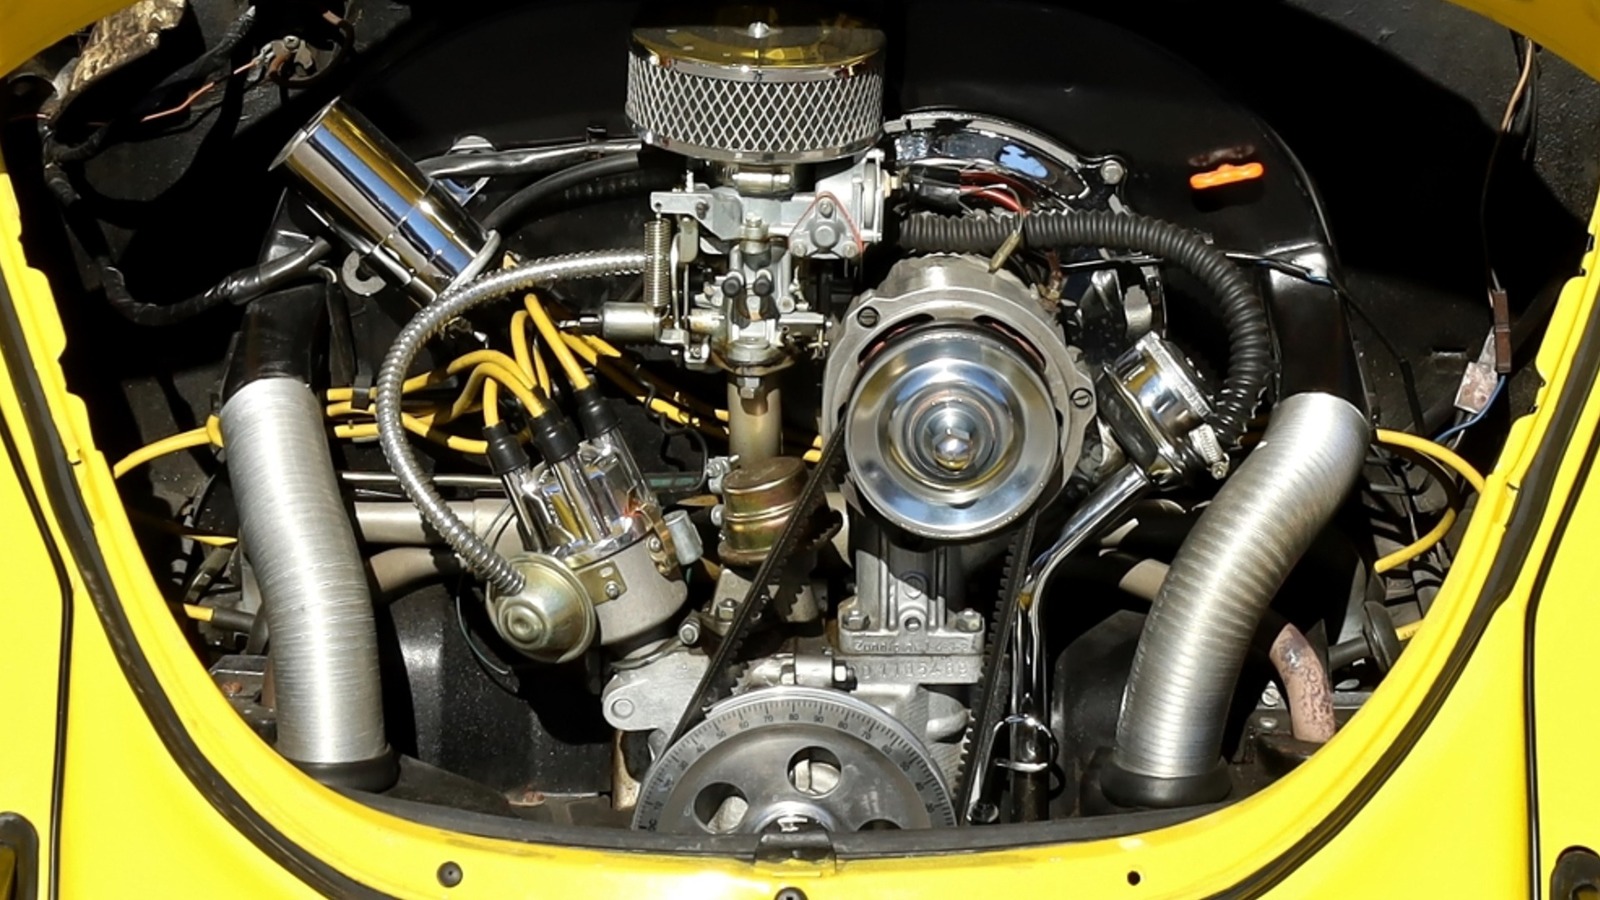 10 Of The Most Reliable Air-Cooled Engines Ever Made, Ranked